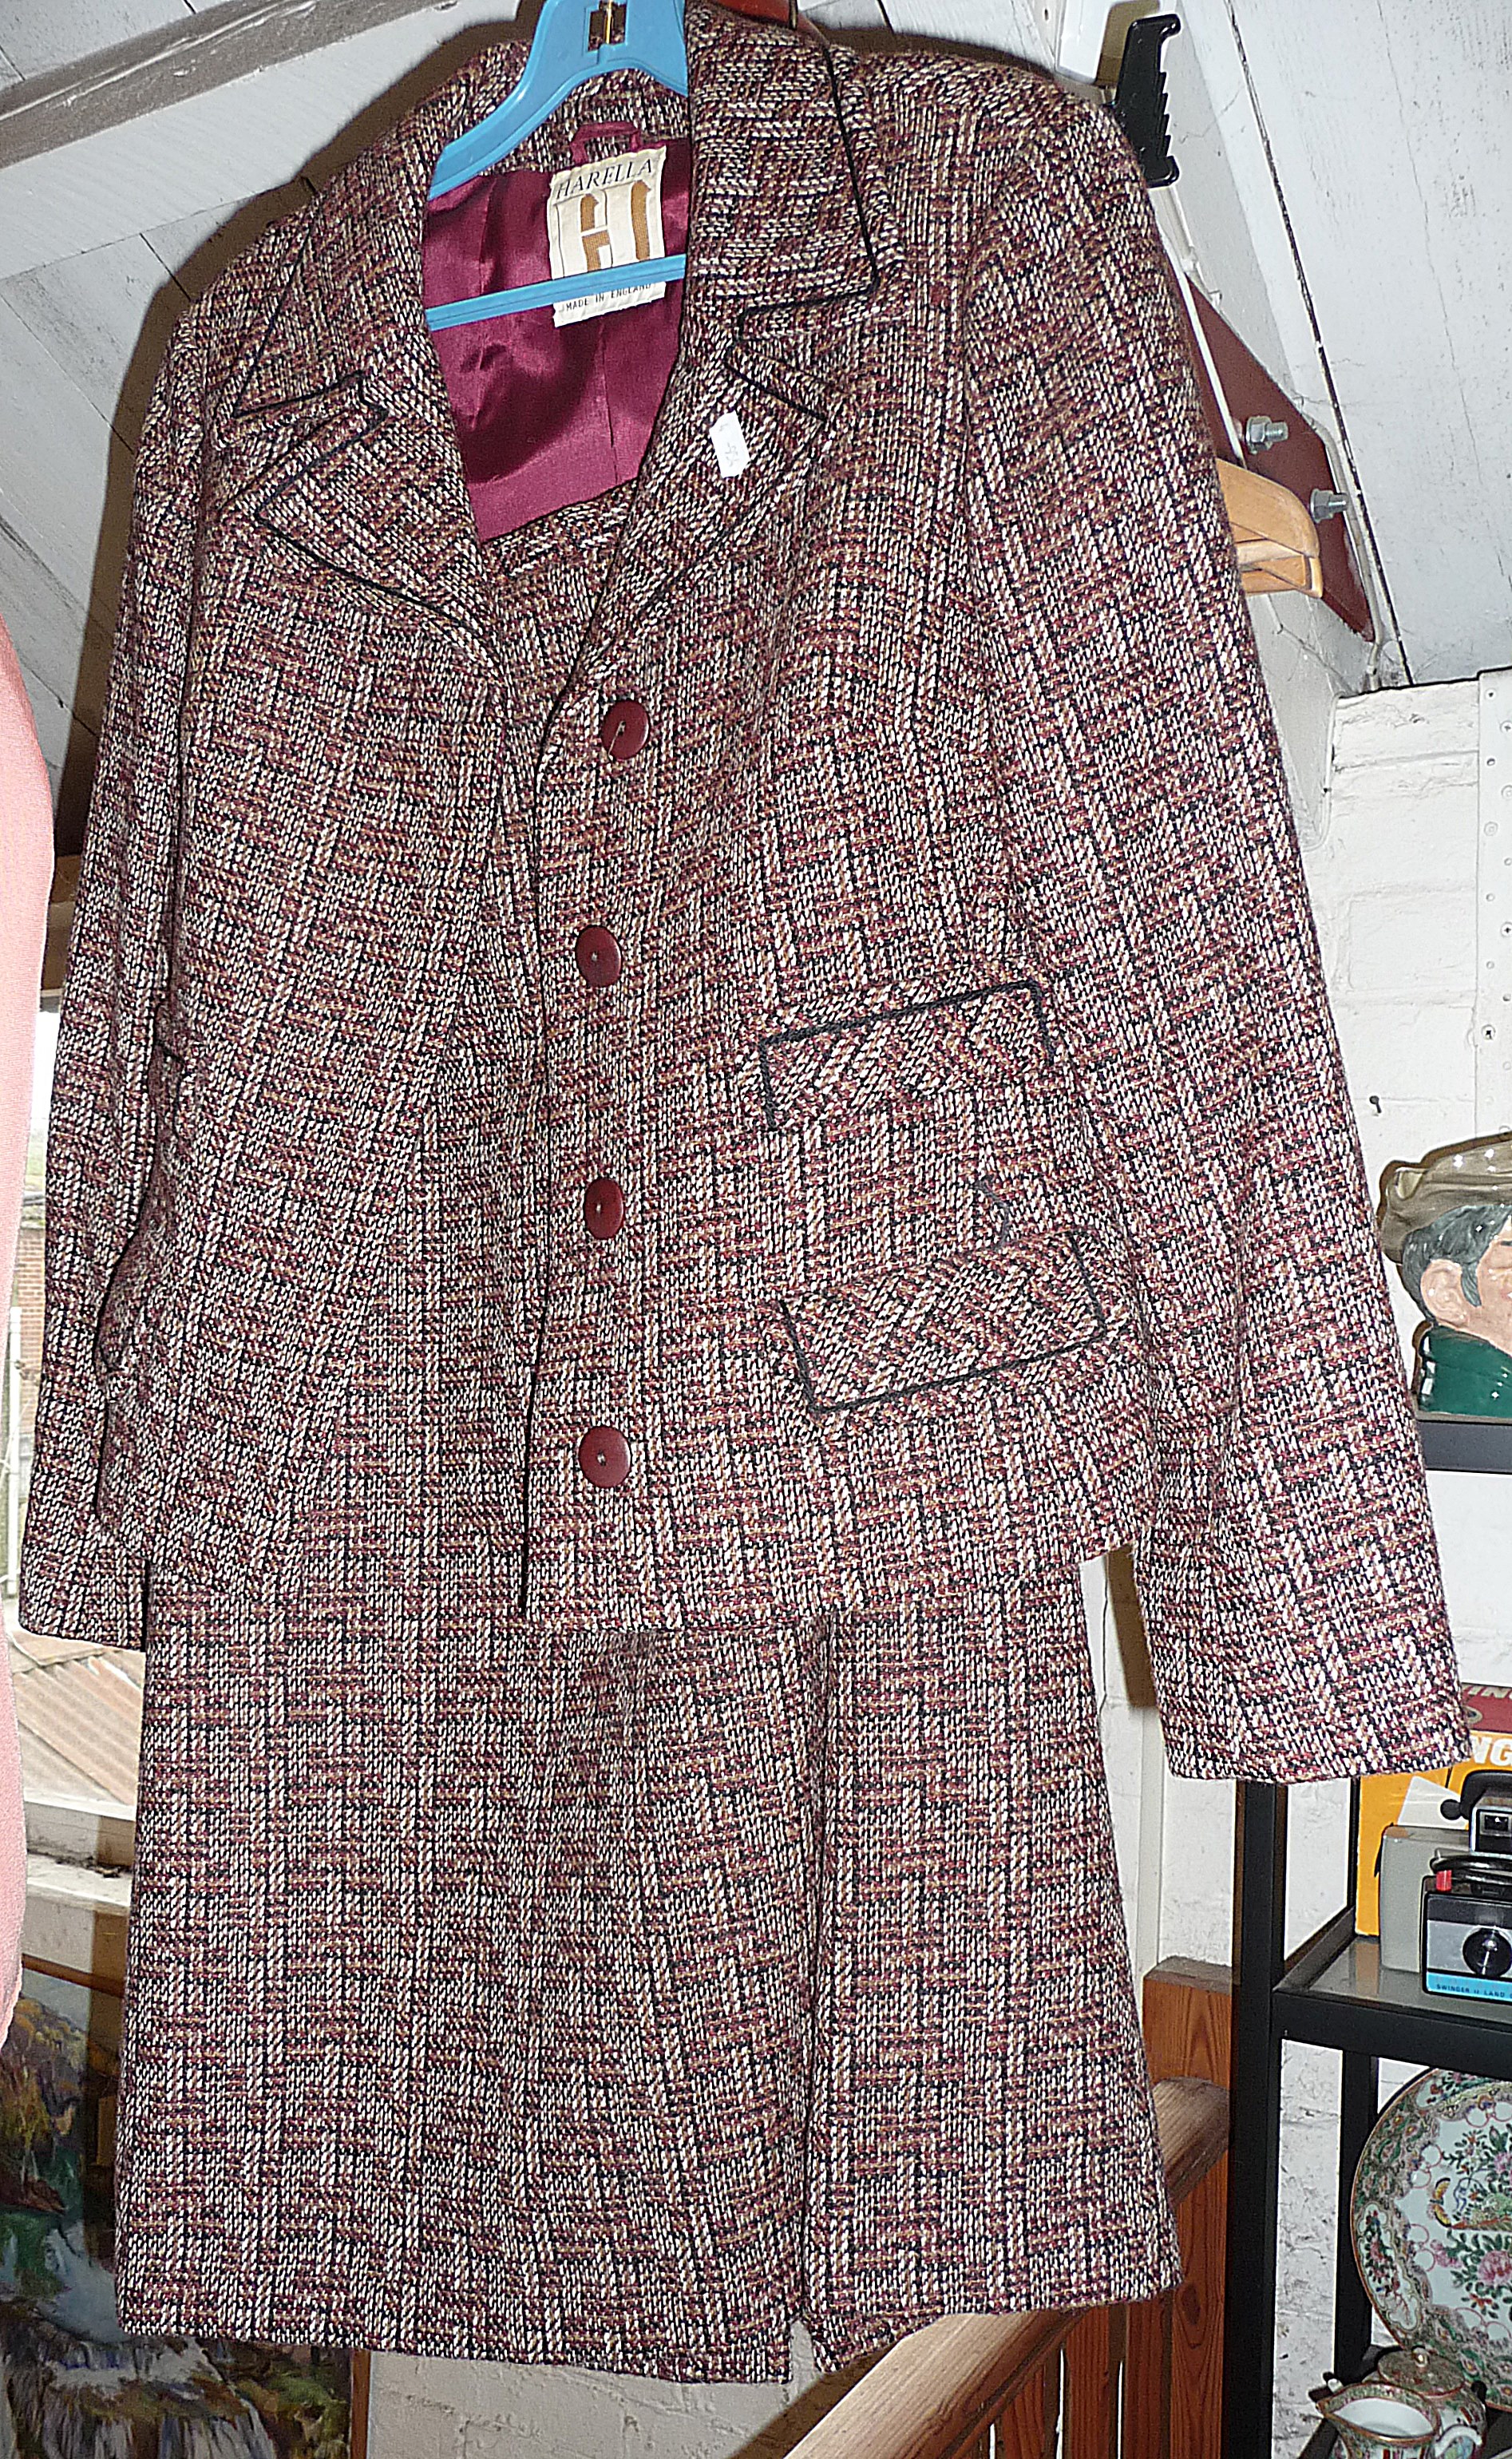 Vintage clothing: Ladies suit by Harella, a Burberry raincoat, a Jaeger blazer, Aquascutum overcoat, - Image 3 of 3